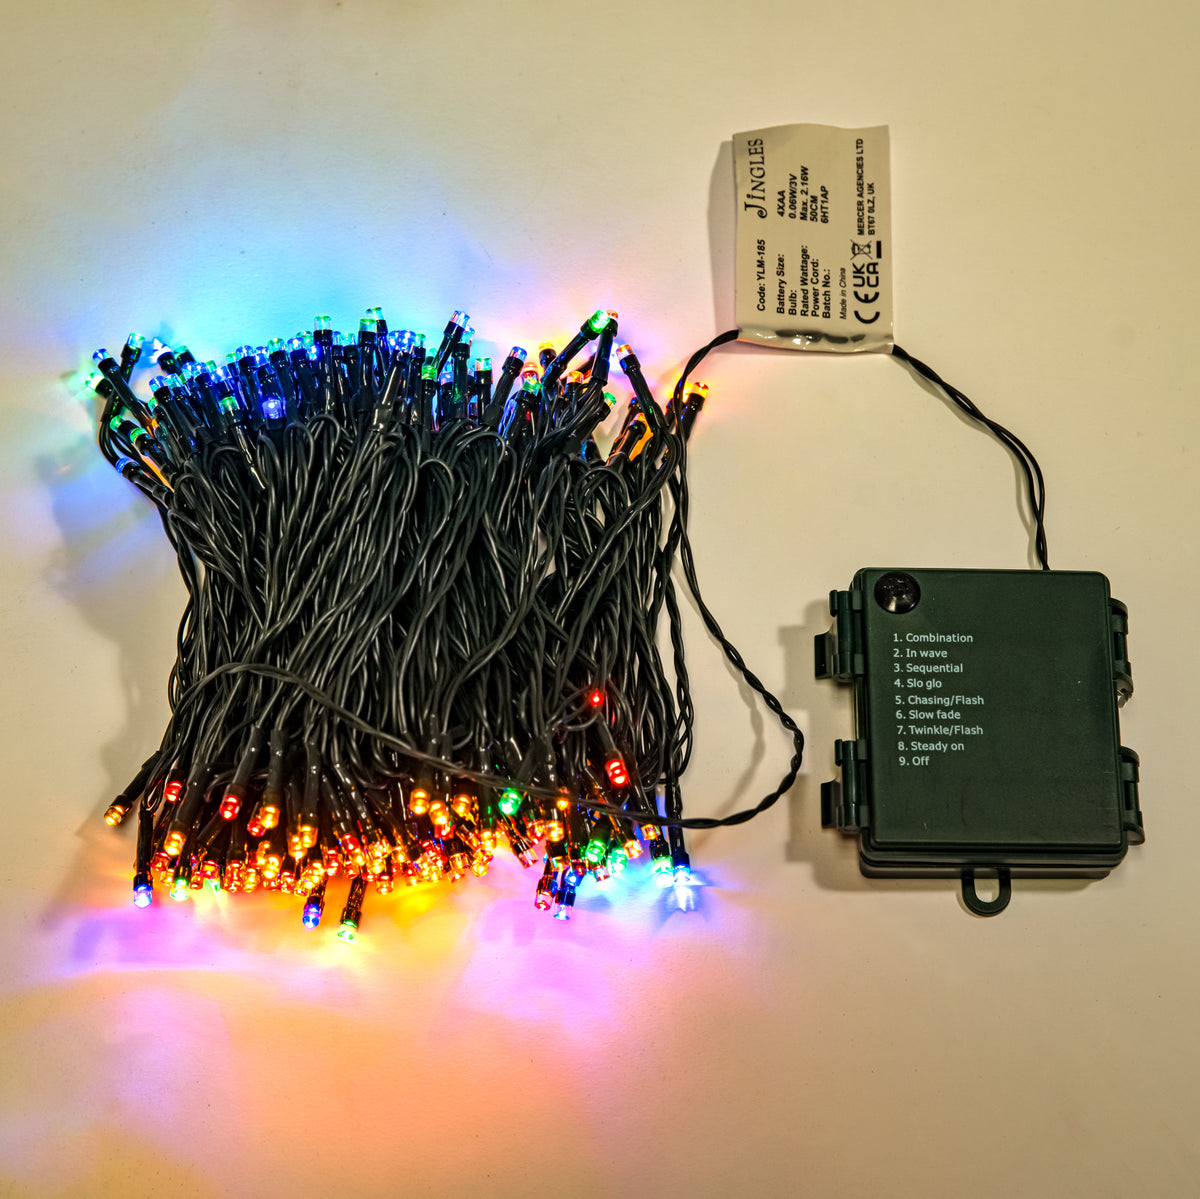 Multi-Coloured LED Battery Operated Multi-Function Christmas Lights - 60, 240, 480